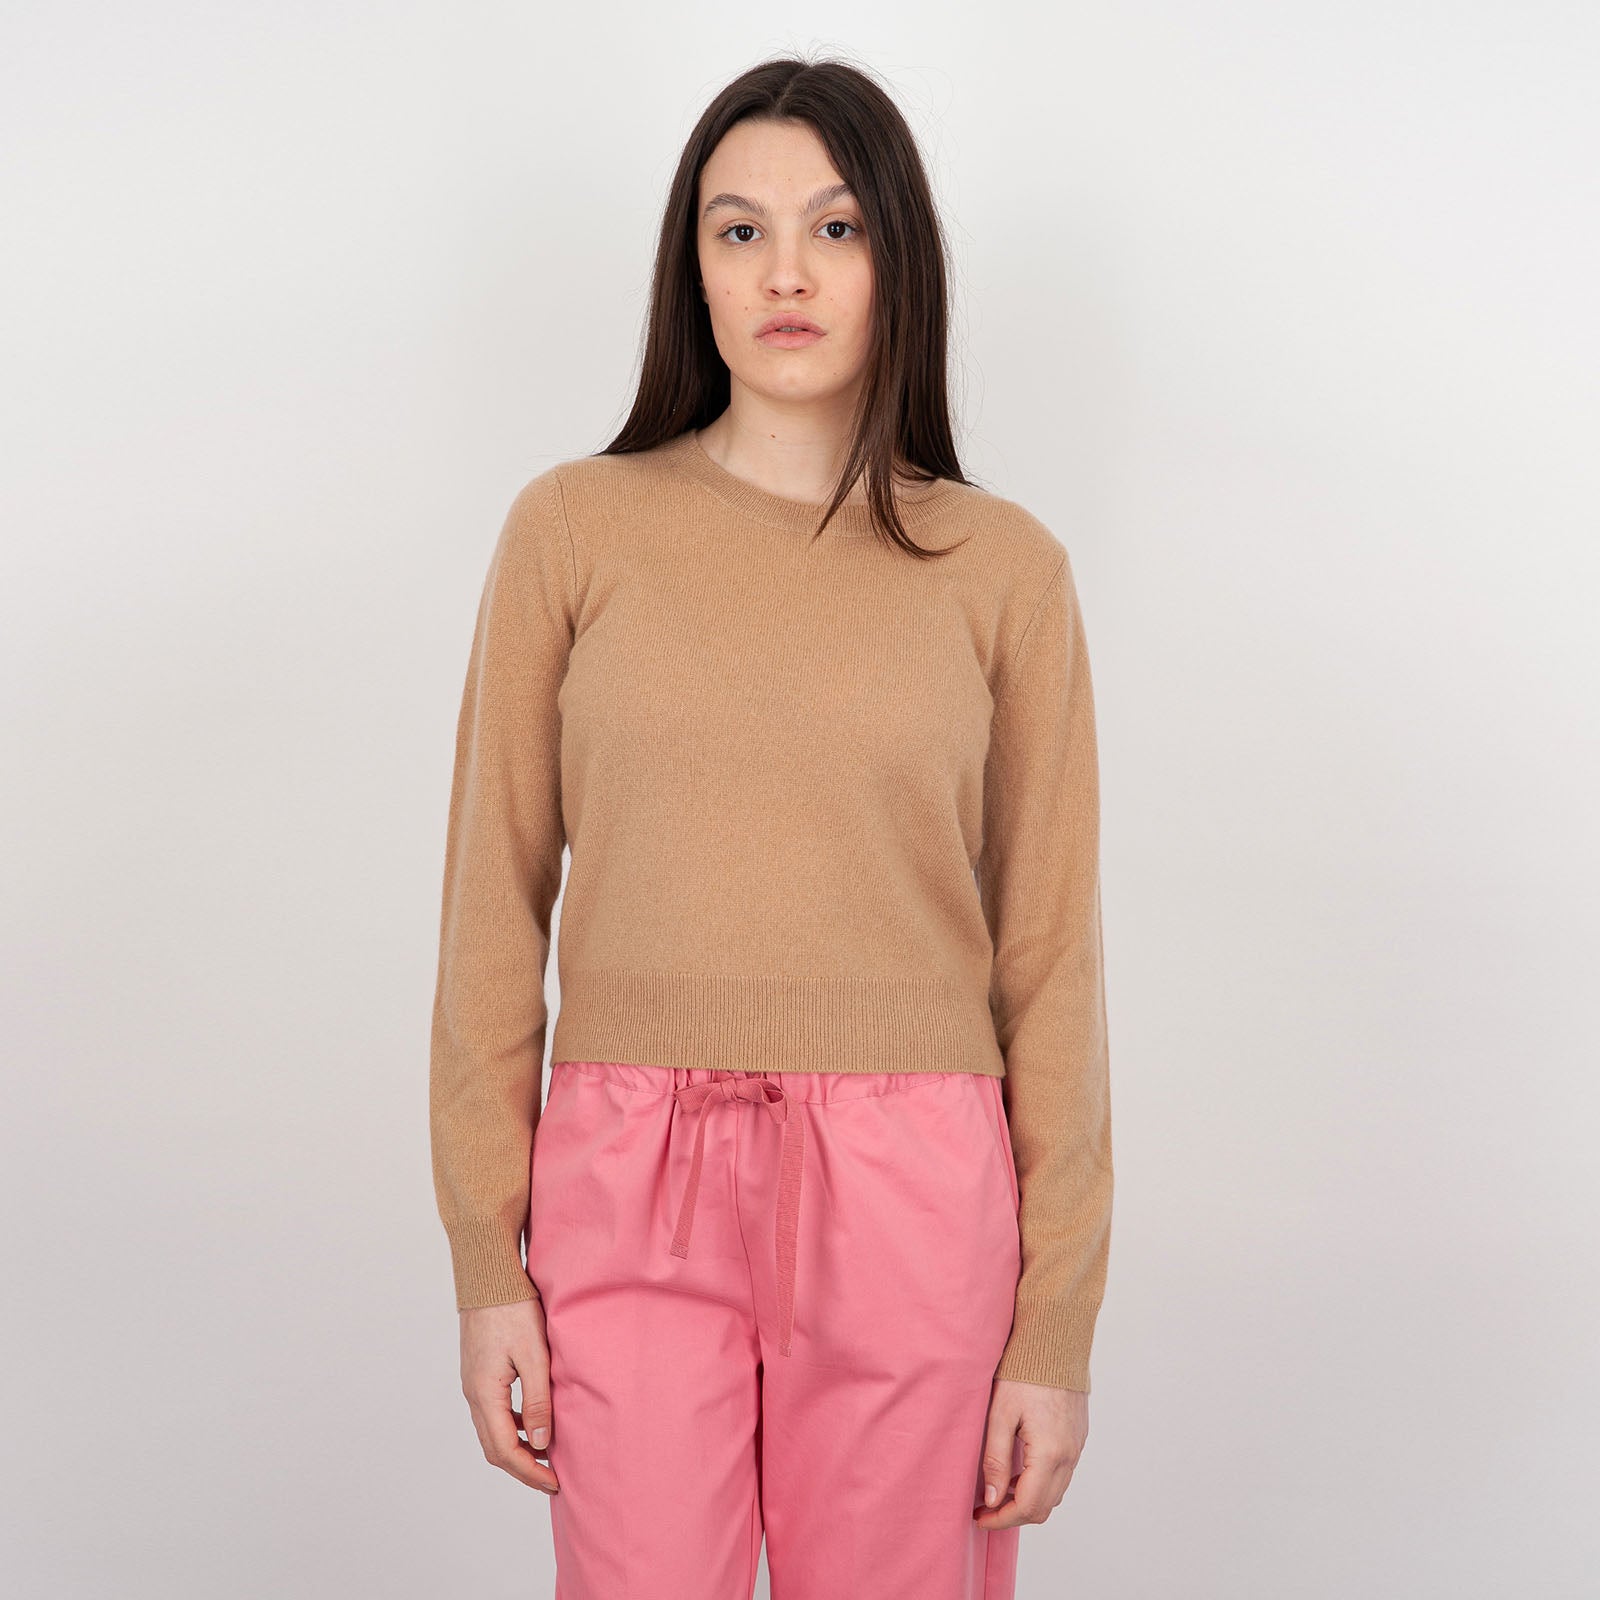 Absolut Cashmere Carlie Crew Neck Sweater in Sand Wool - 6